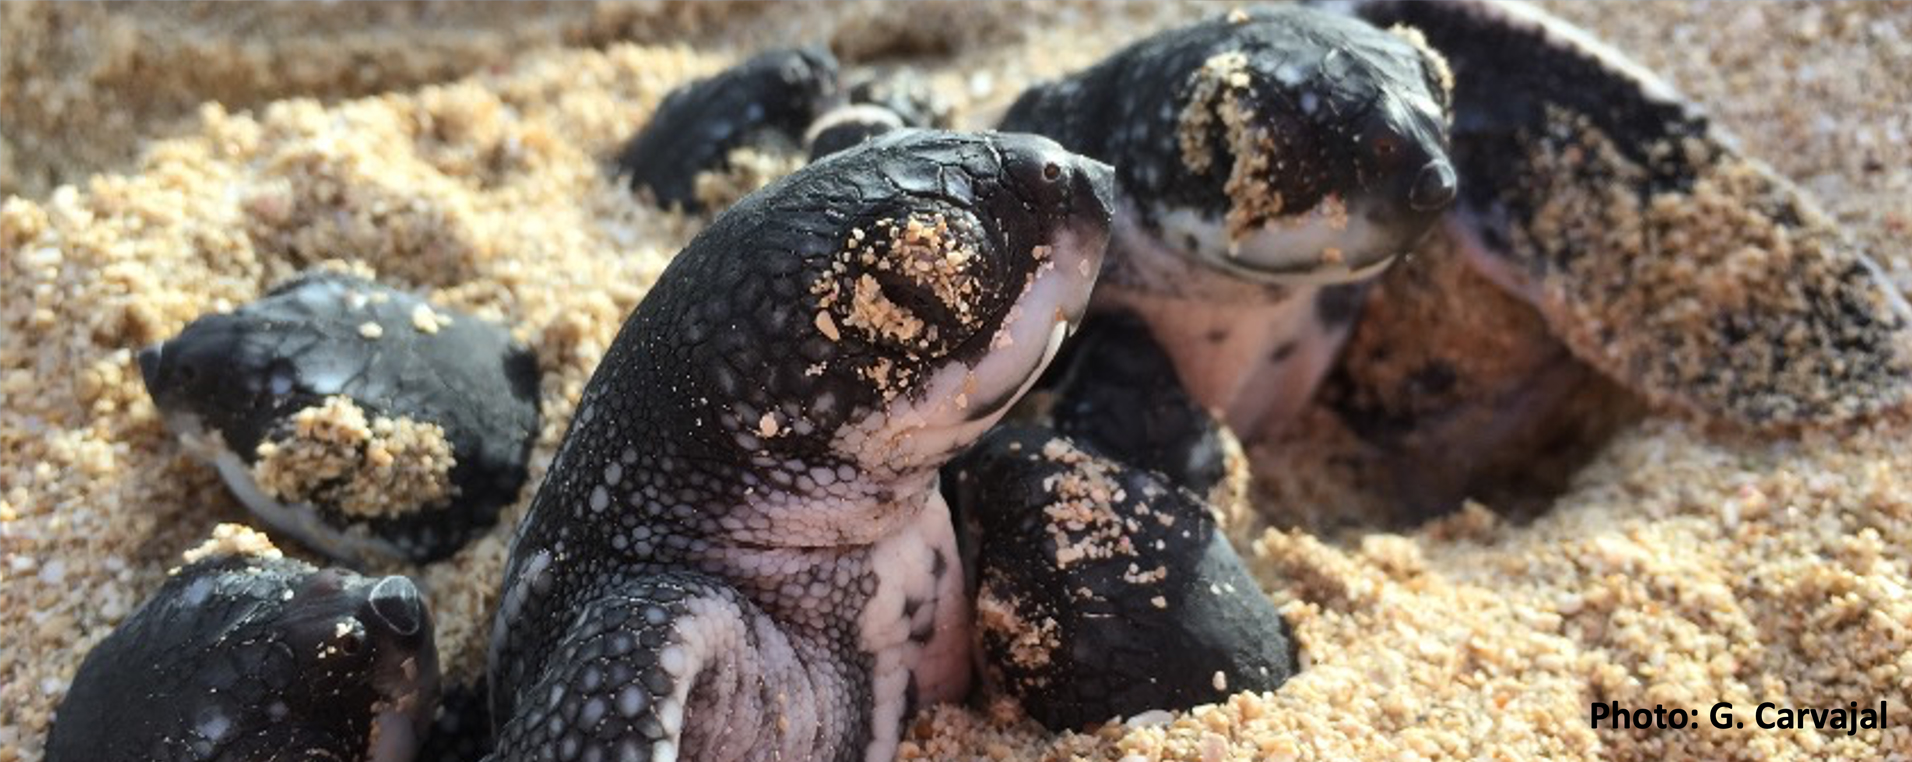 Leatherback Hatchlings in a Changing World